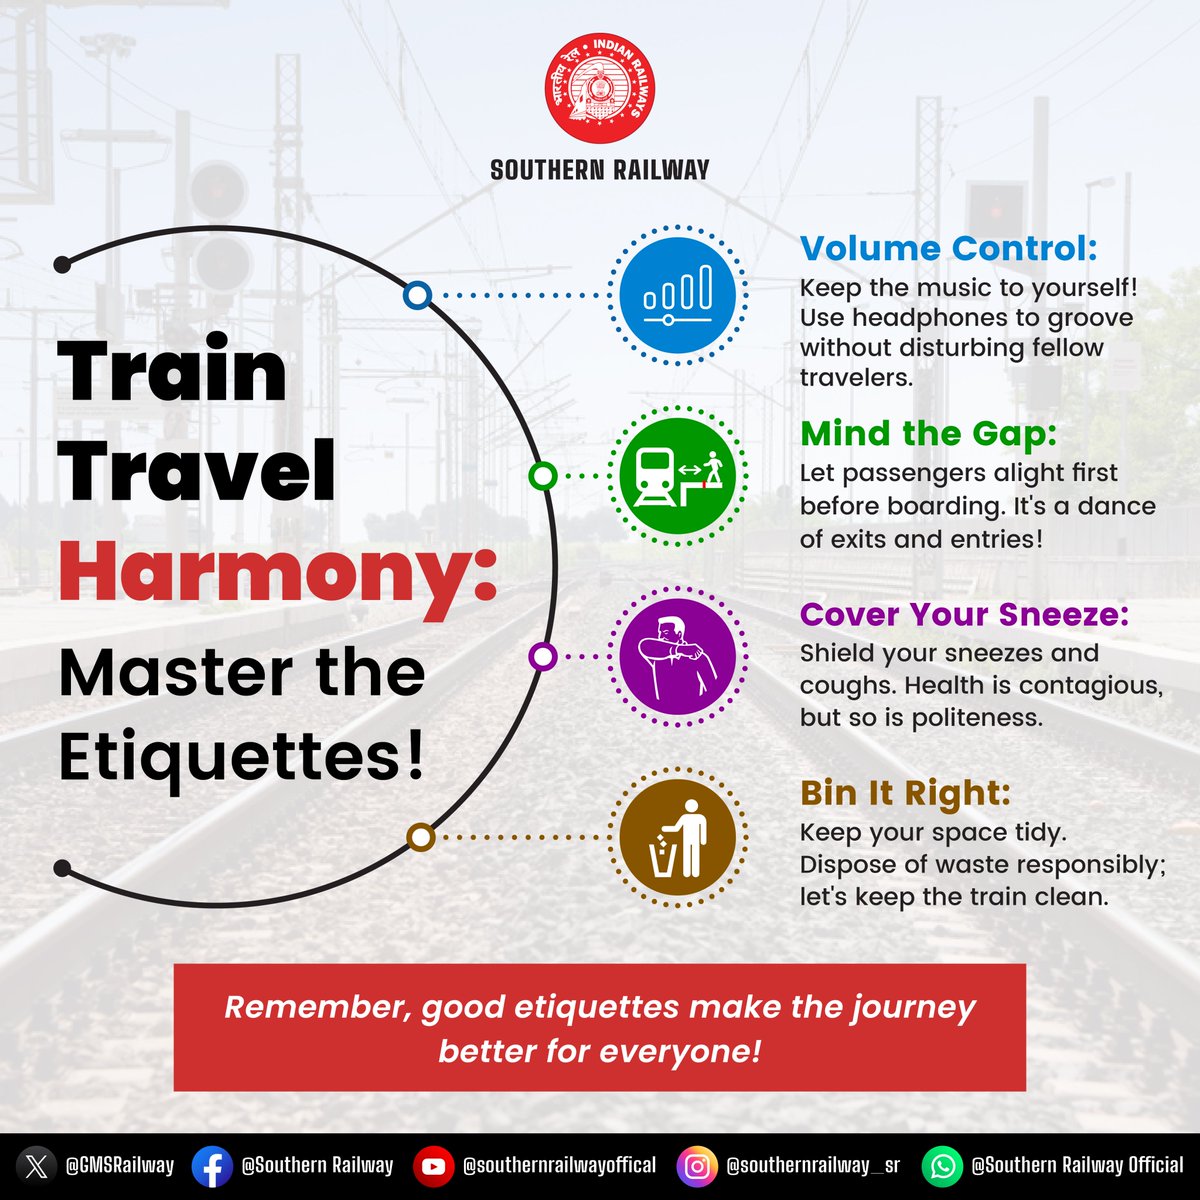 Promote a Pleasant Train Journey with These Essential Etiquettes! 🚆✨ Respectful travel tips for a smoother ride. #SouthernRailway #TravelAdvice #TrainManners